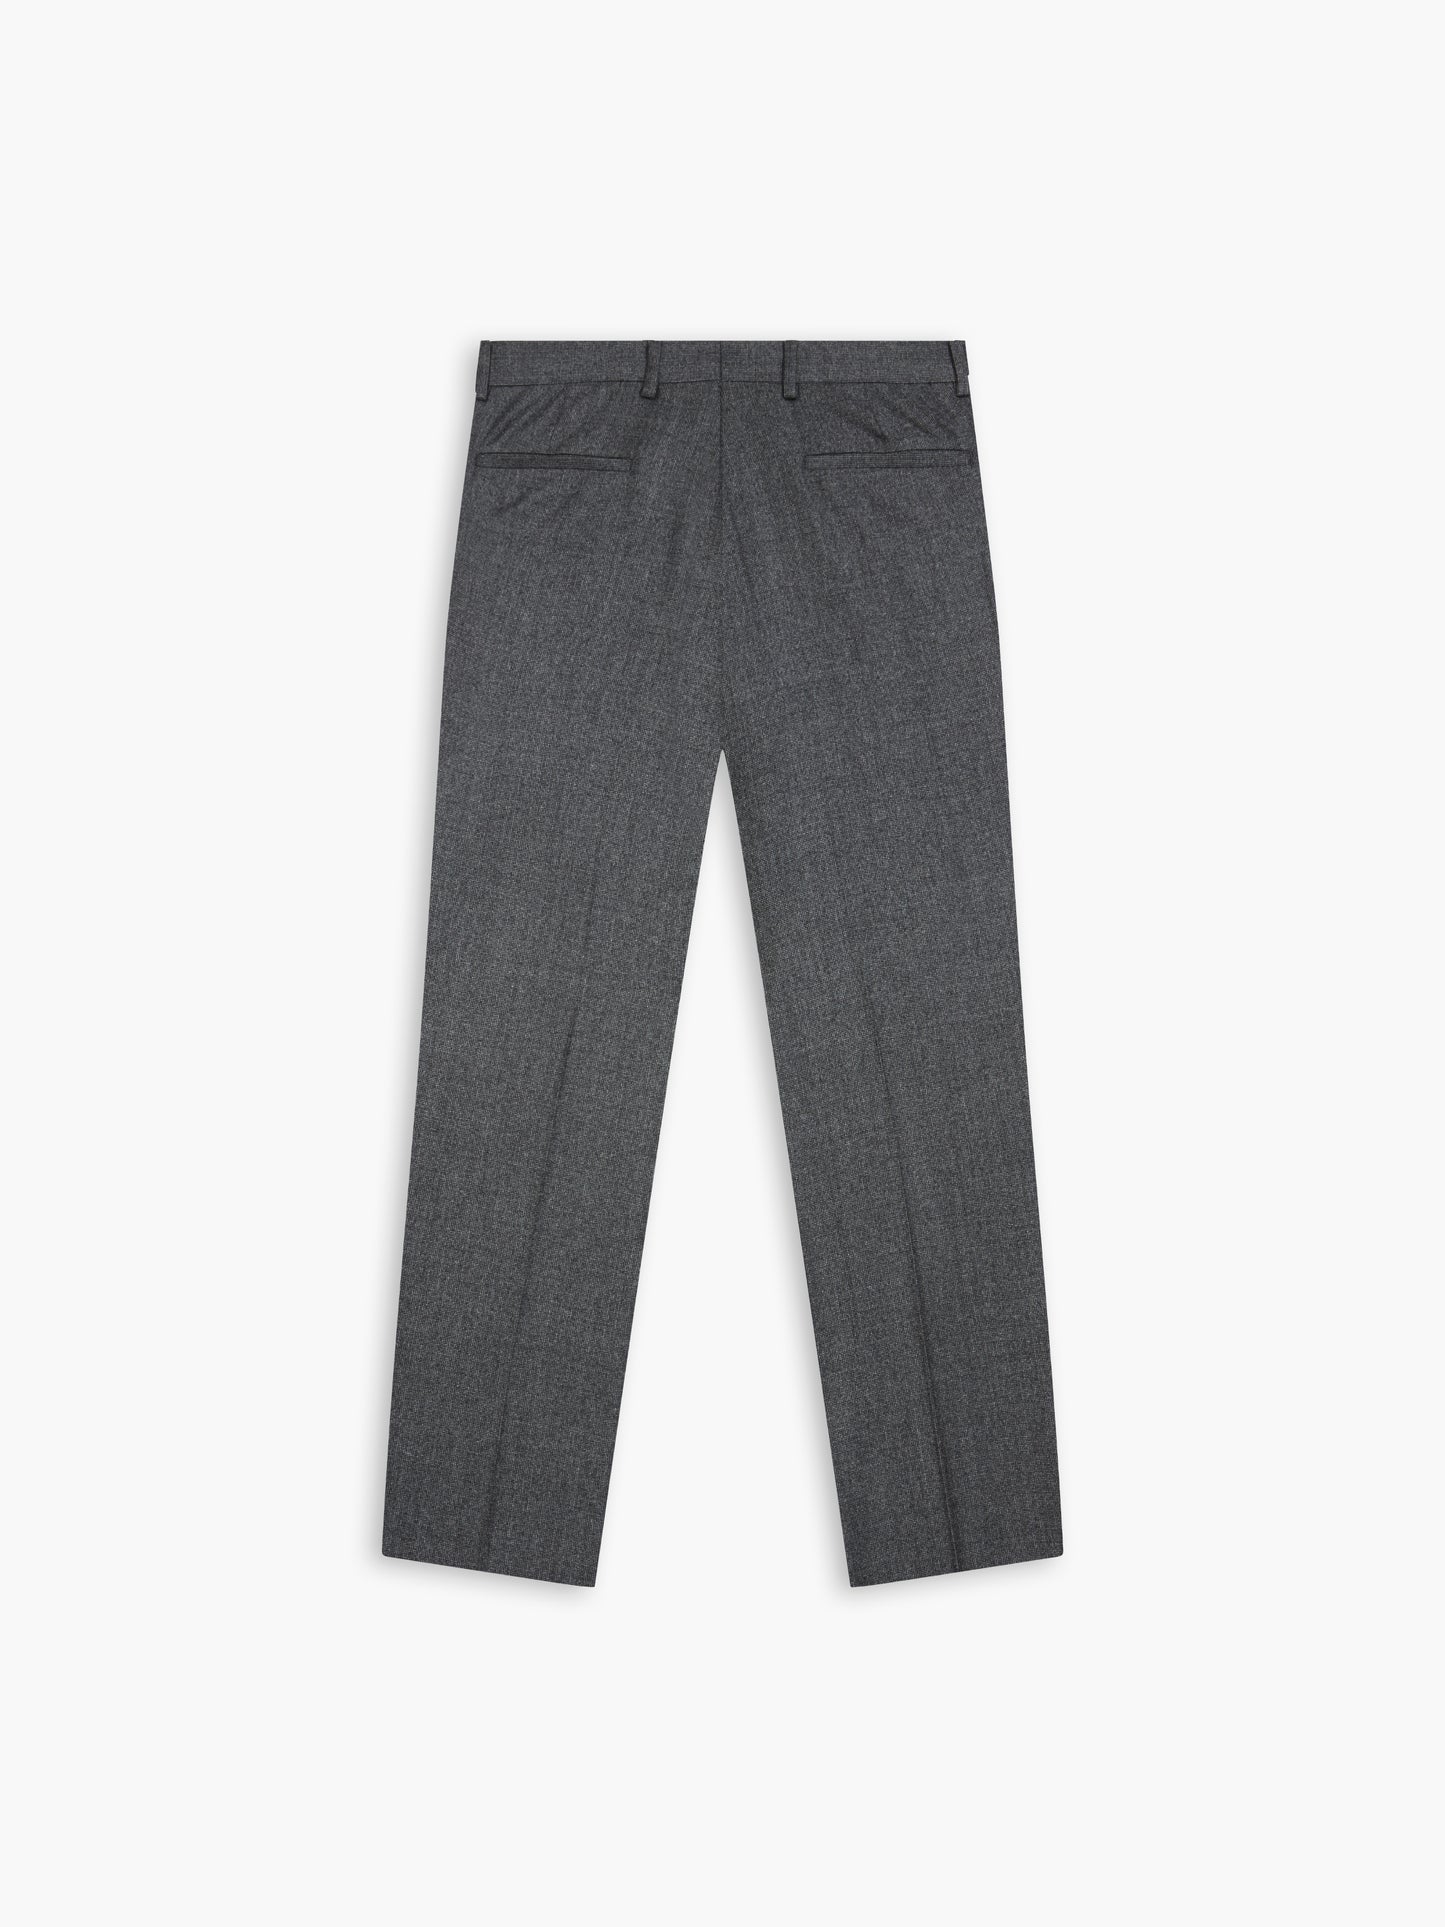 Anderson Infinity Active Slim Fit Charcoal Merino Trousers